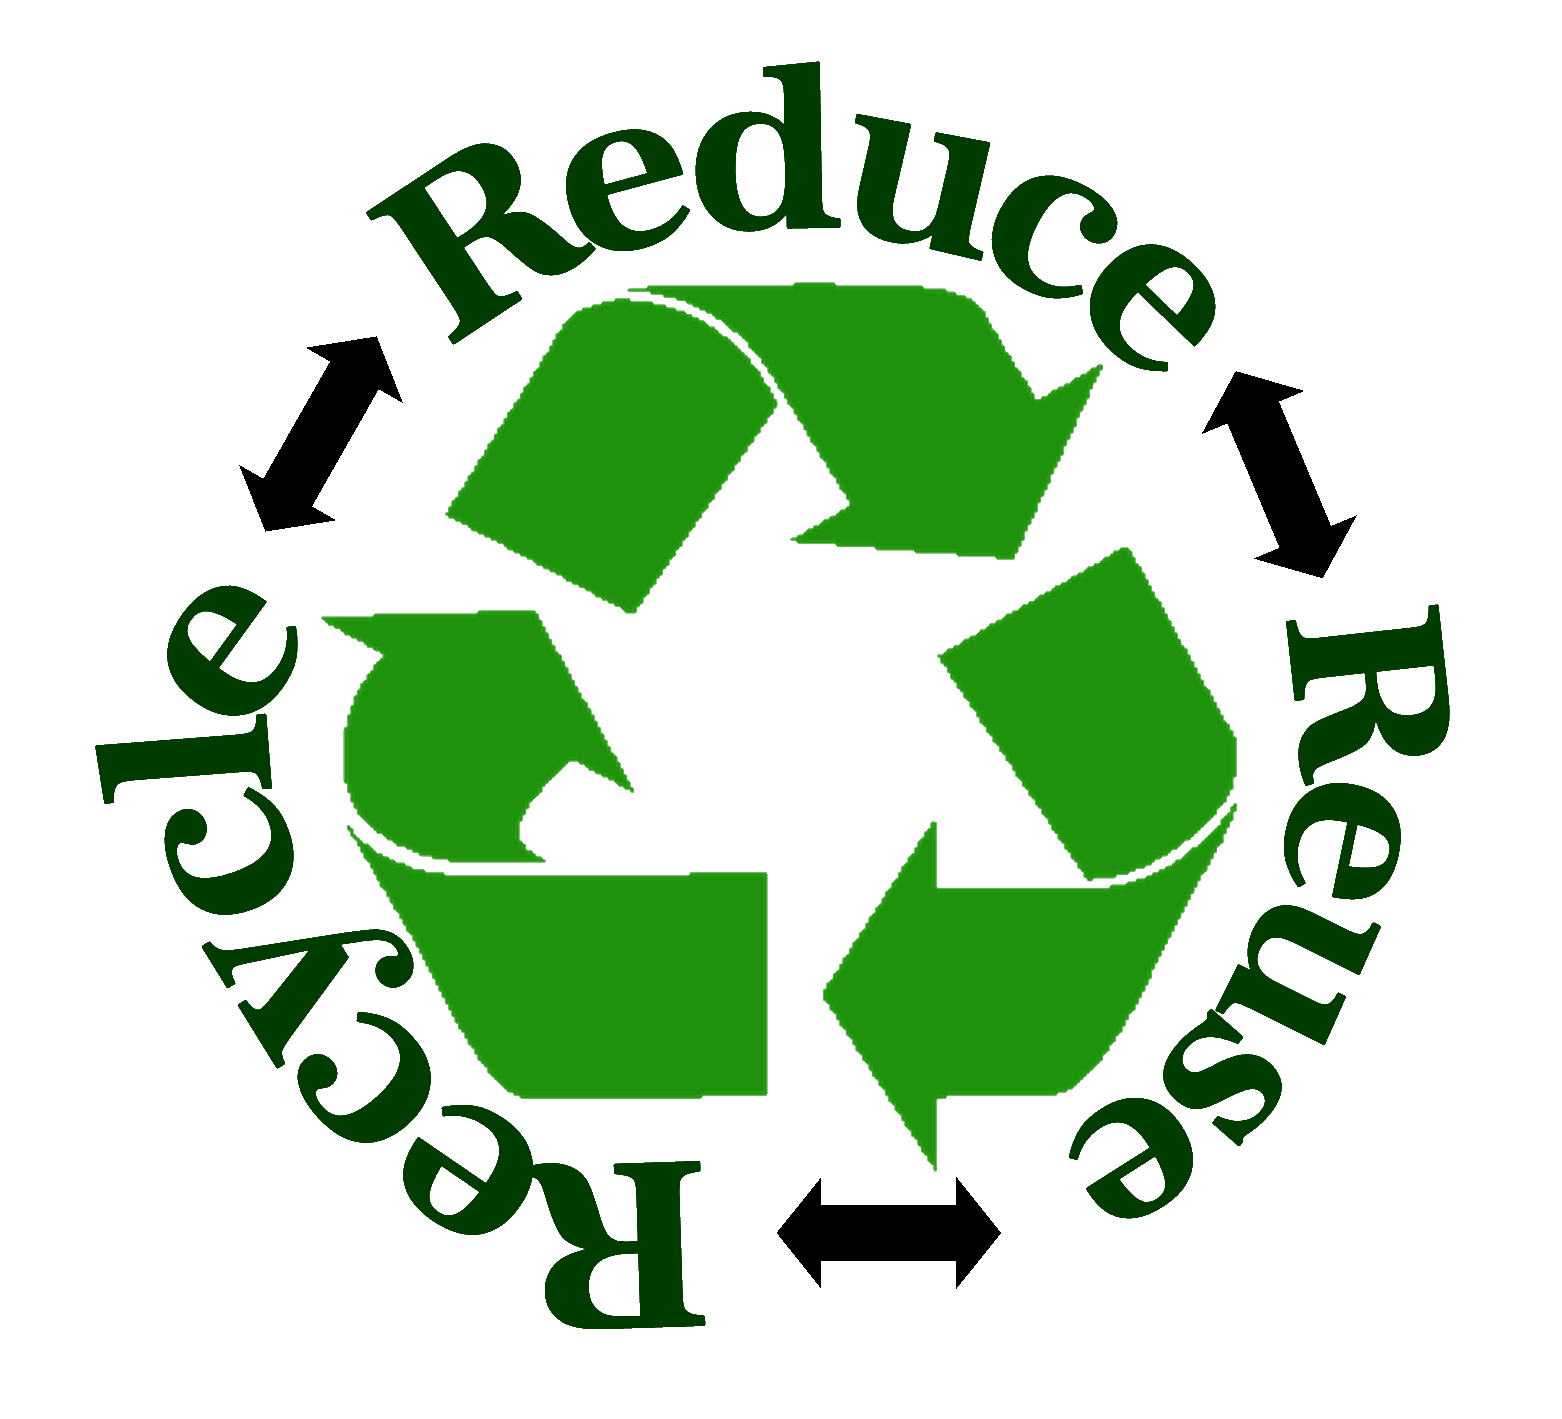 Conservation and recycling essay